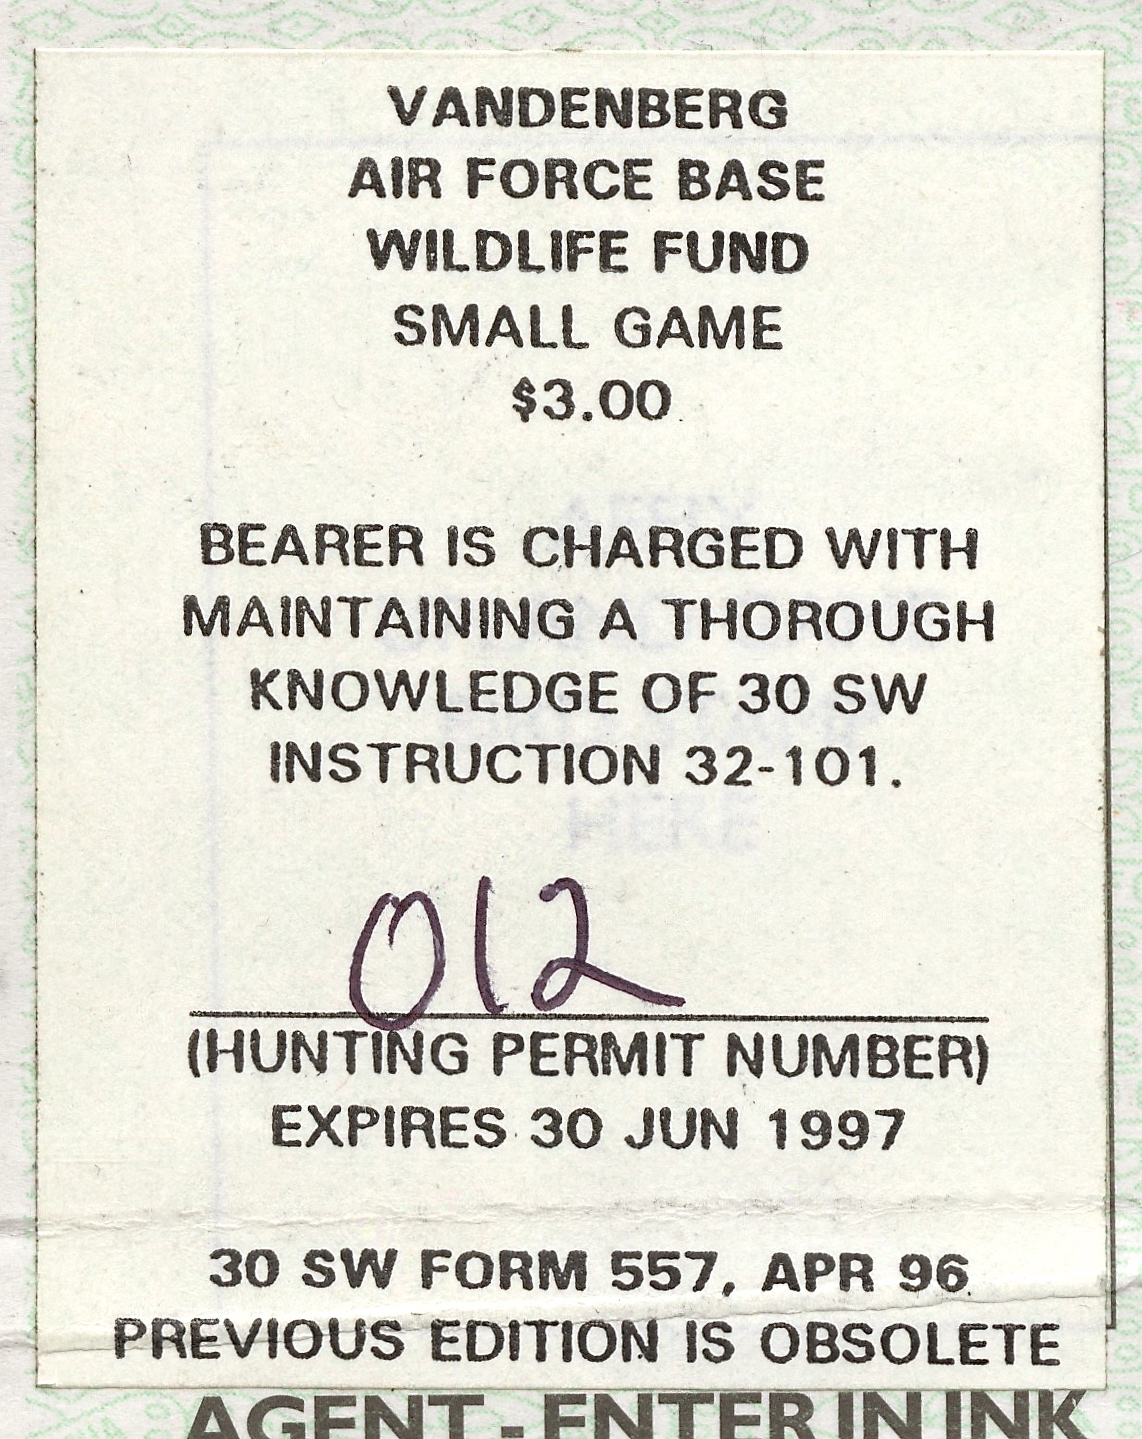 1996-97 VAFB Small Game